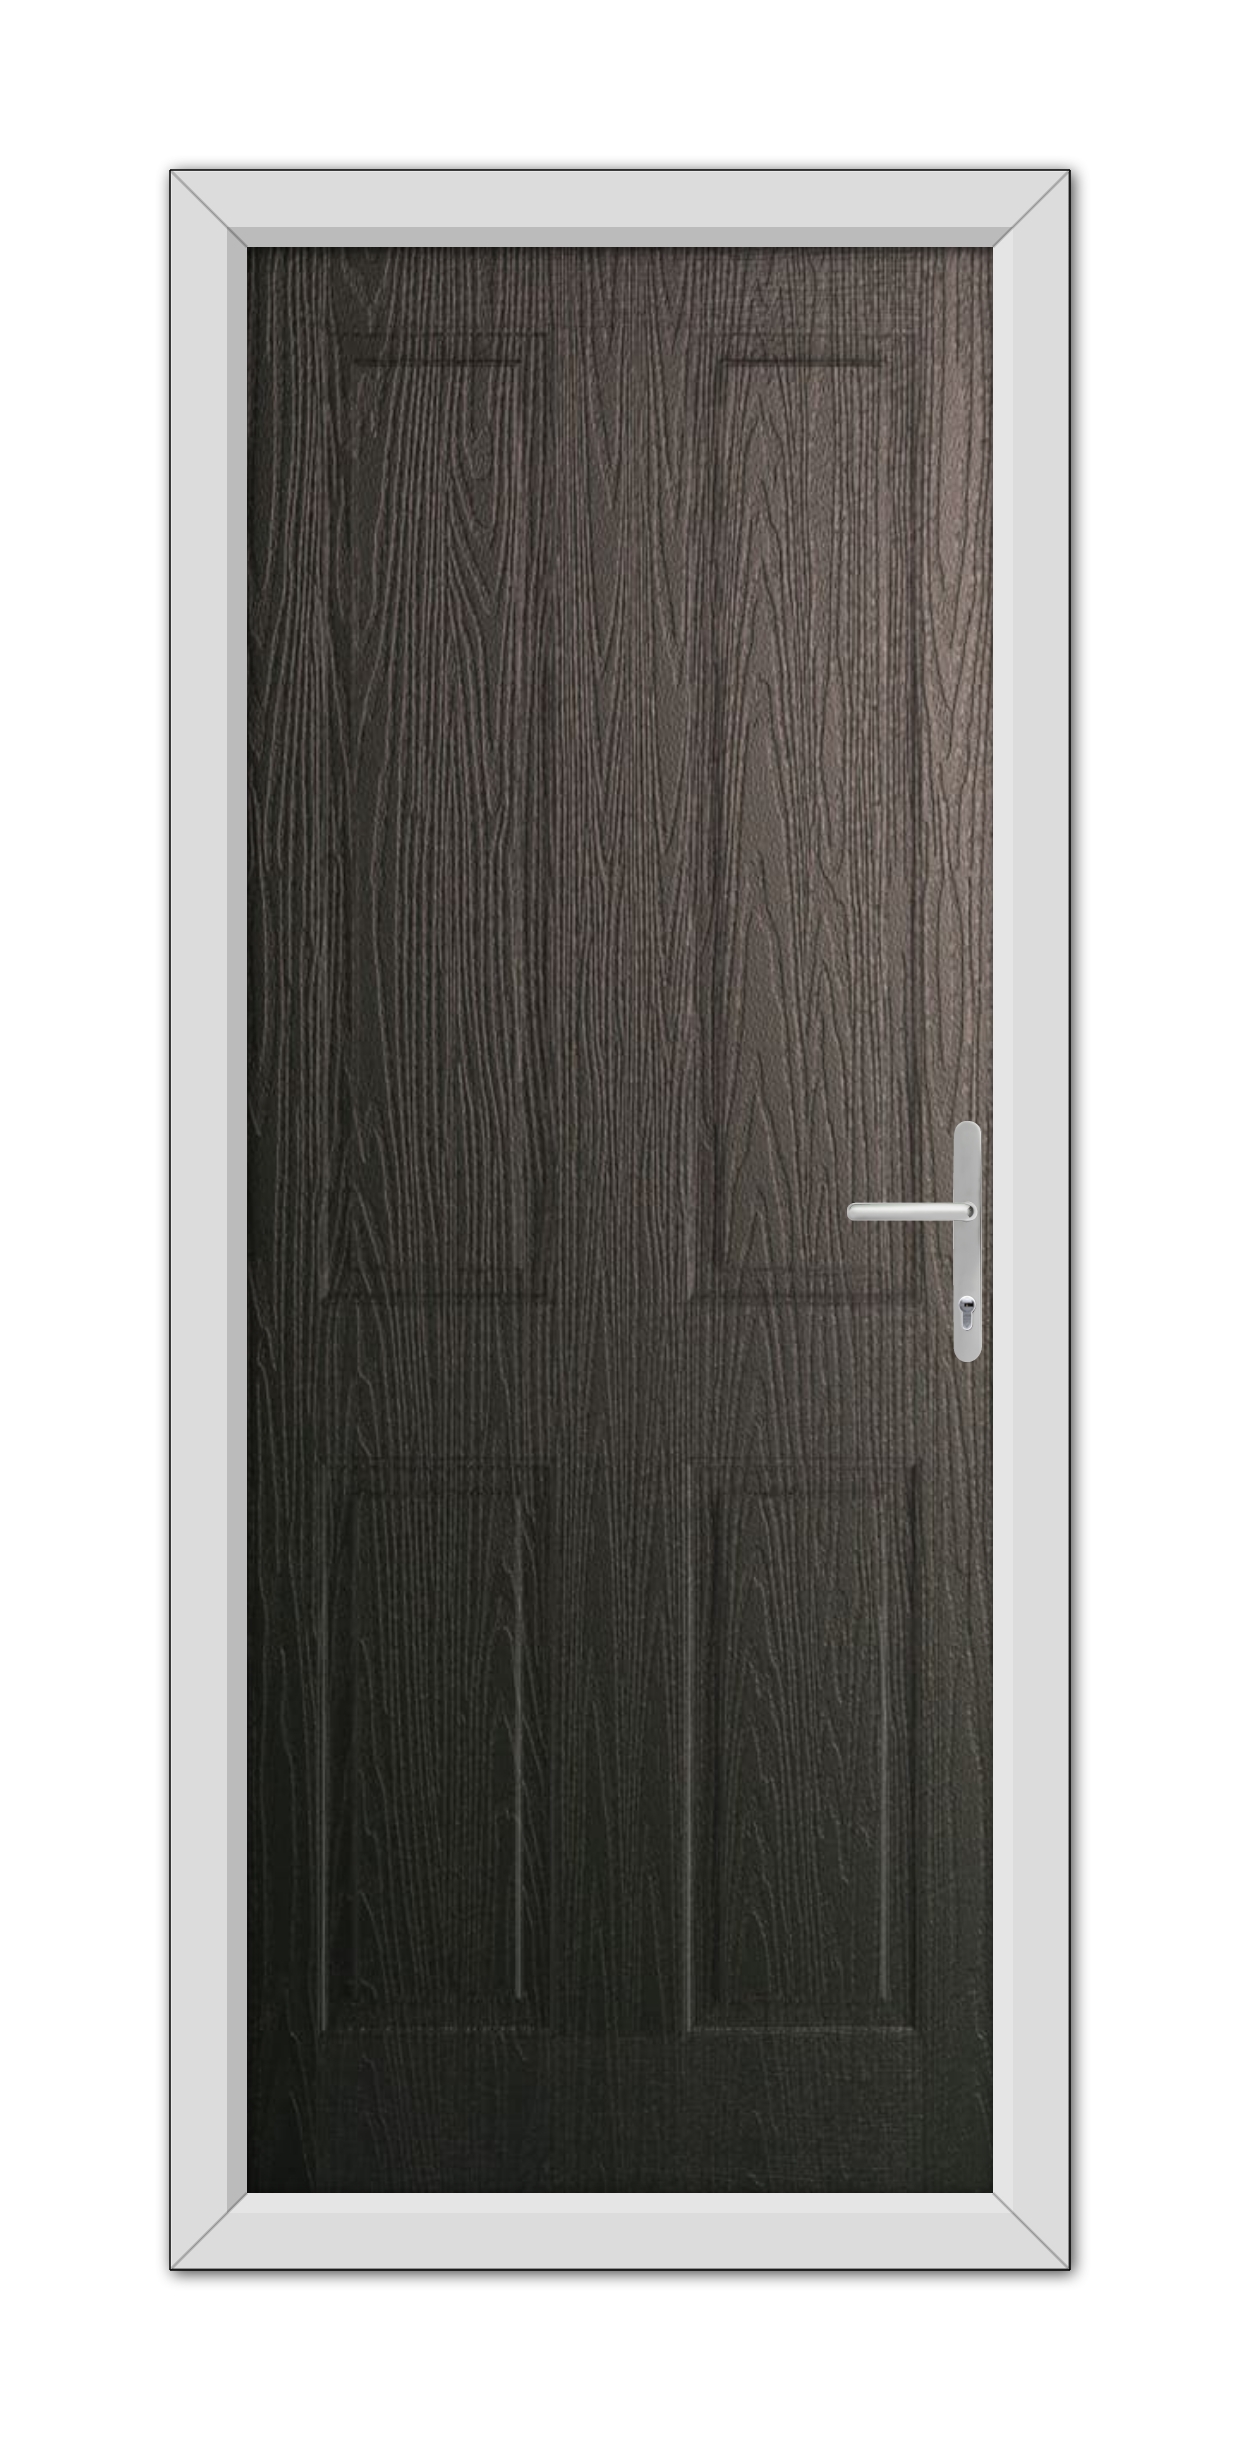 A Schwarzbraun Whitmore Solid Composite Door 48mm Timber Core with a textured surface and a white metal handle, framed by a light gray door frame, isolated on a white background.